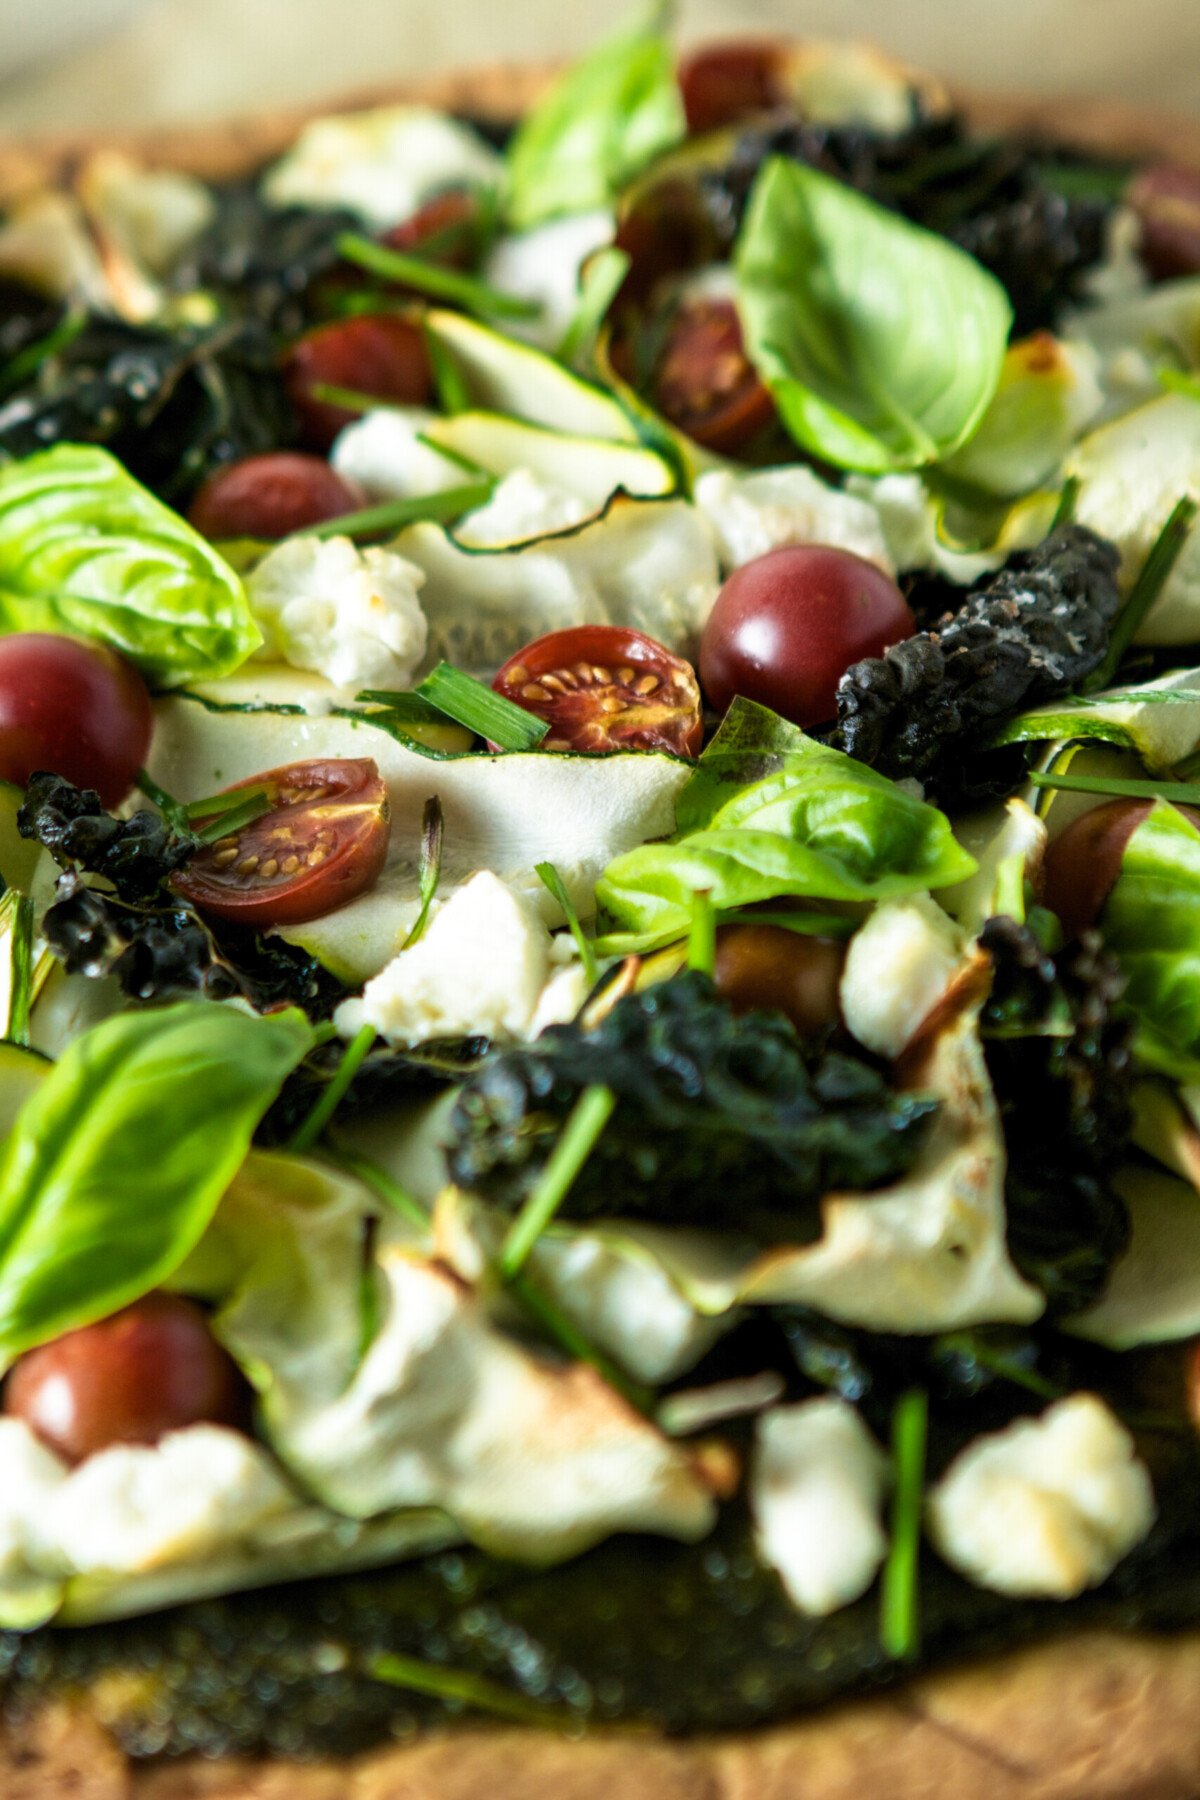 close up photograph of pizza toppings including basil, tomatoes and kale